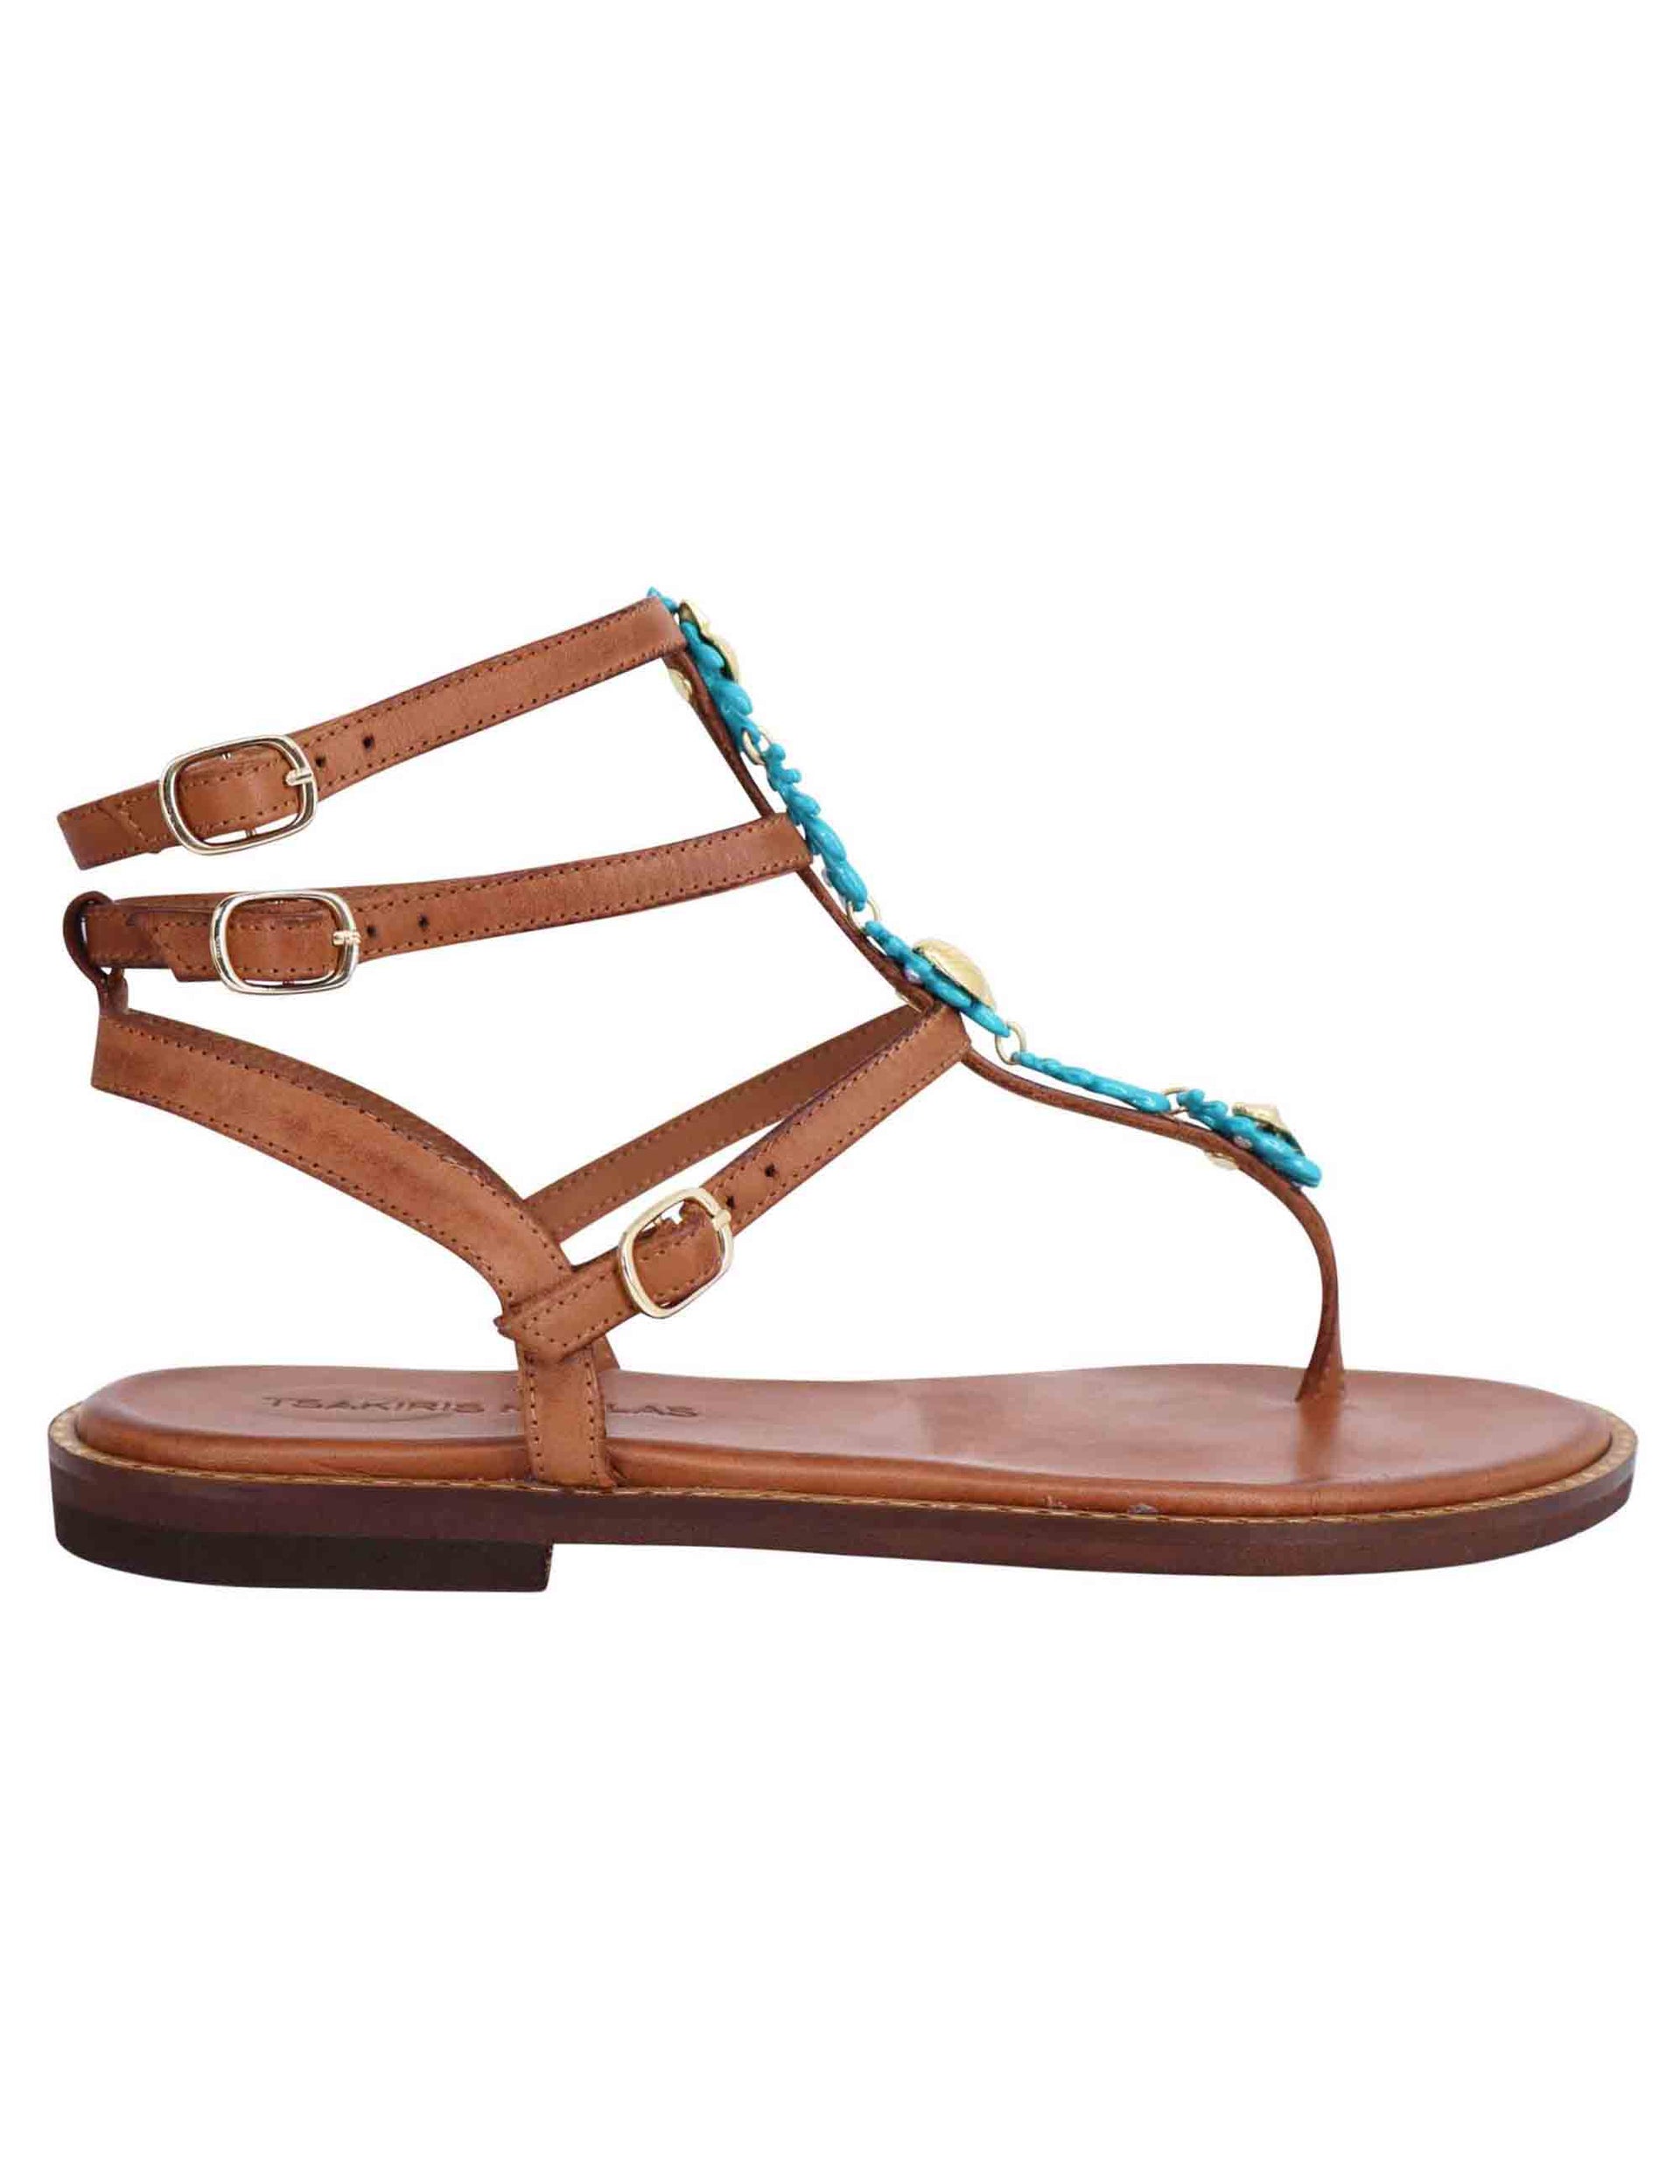 Women's flat sandals in tan leather with turquoise accessory and ankle straps